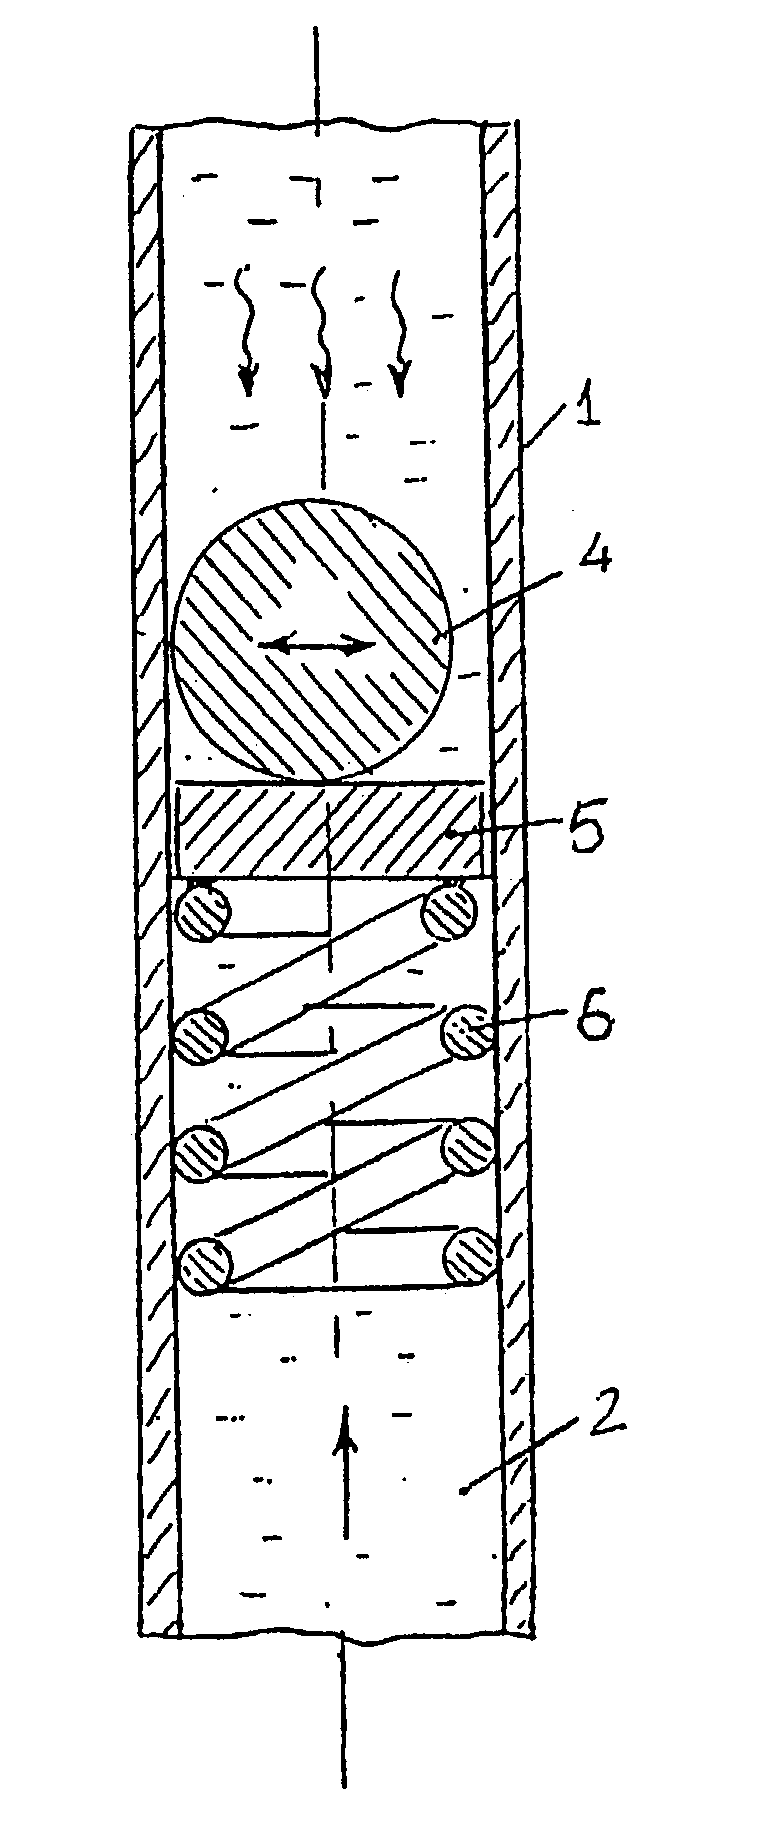 Method for vibrational impact on a pipe string in a borehole and devices for carrying out said method